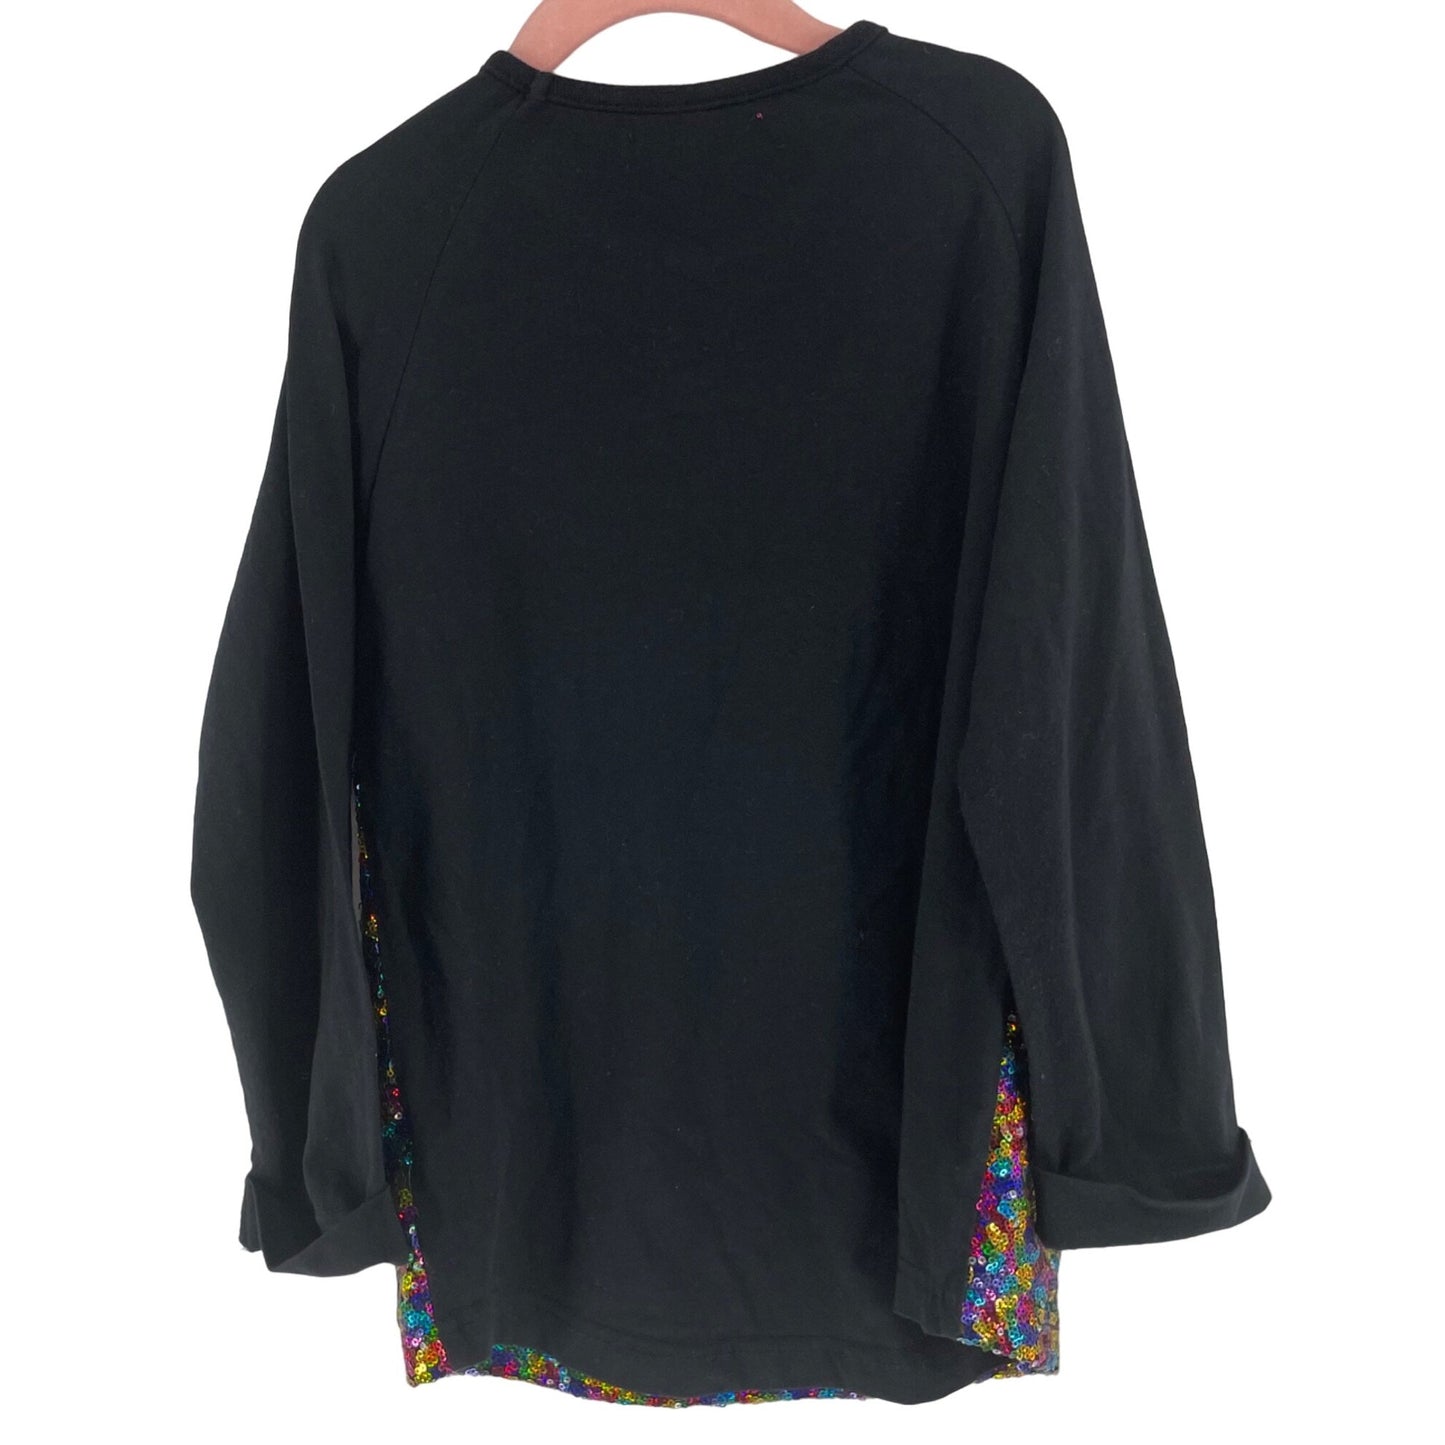 Betsey Johnson Girl's Size Large (12) Black/Multi-Colored Long-Sleeved Sequin Top